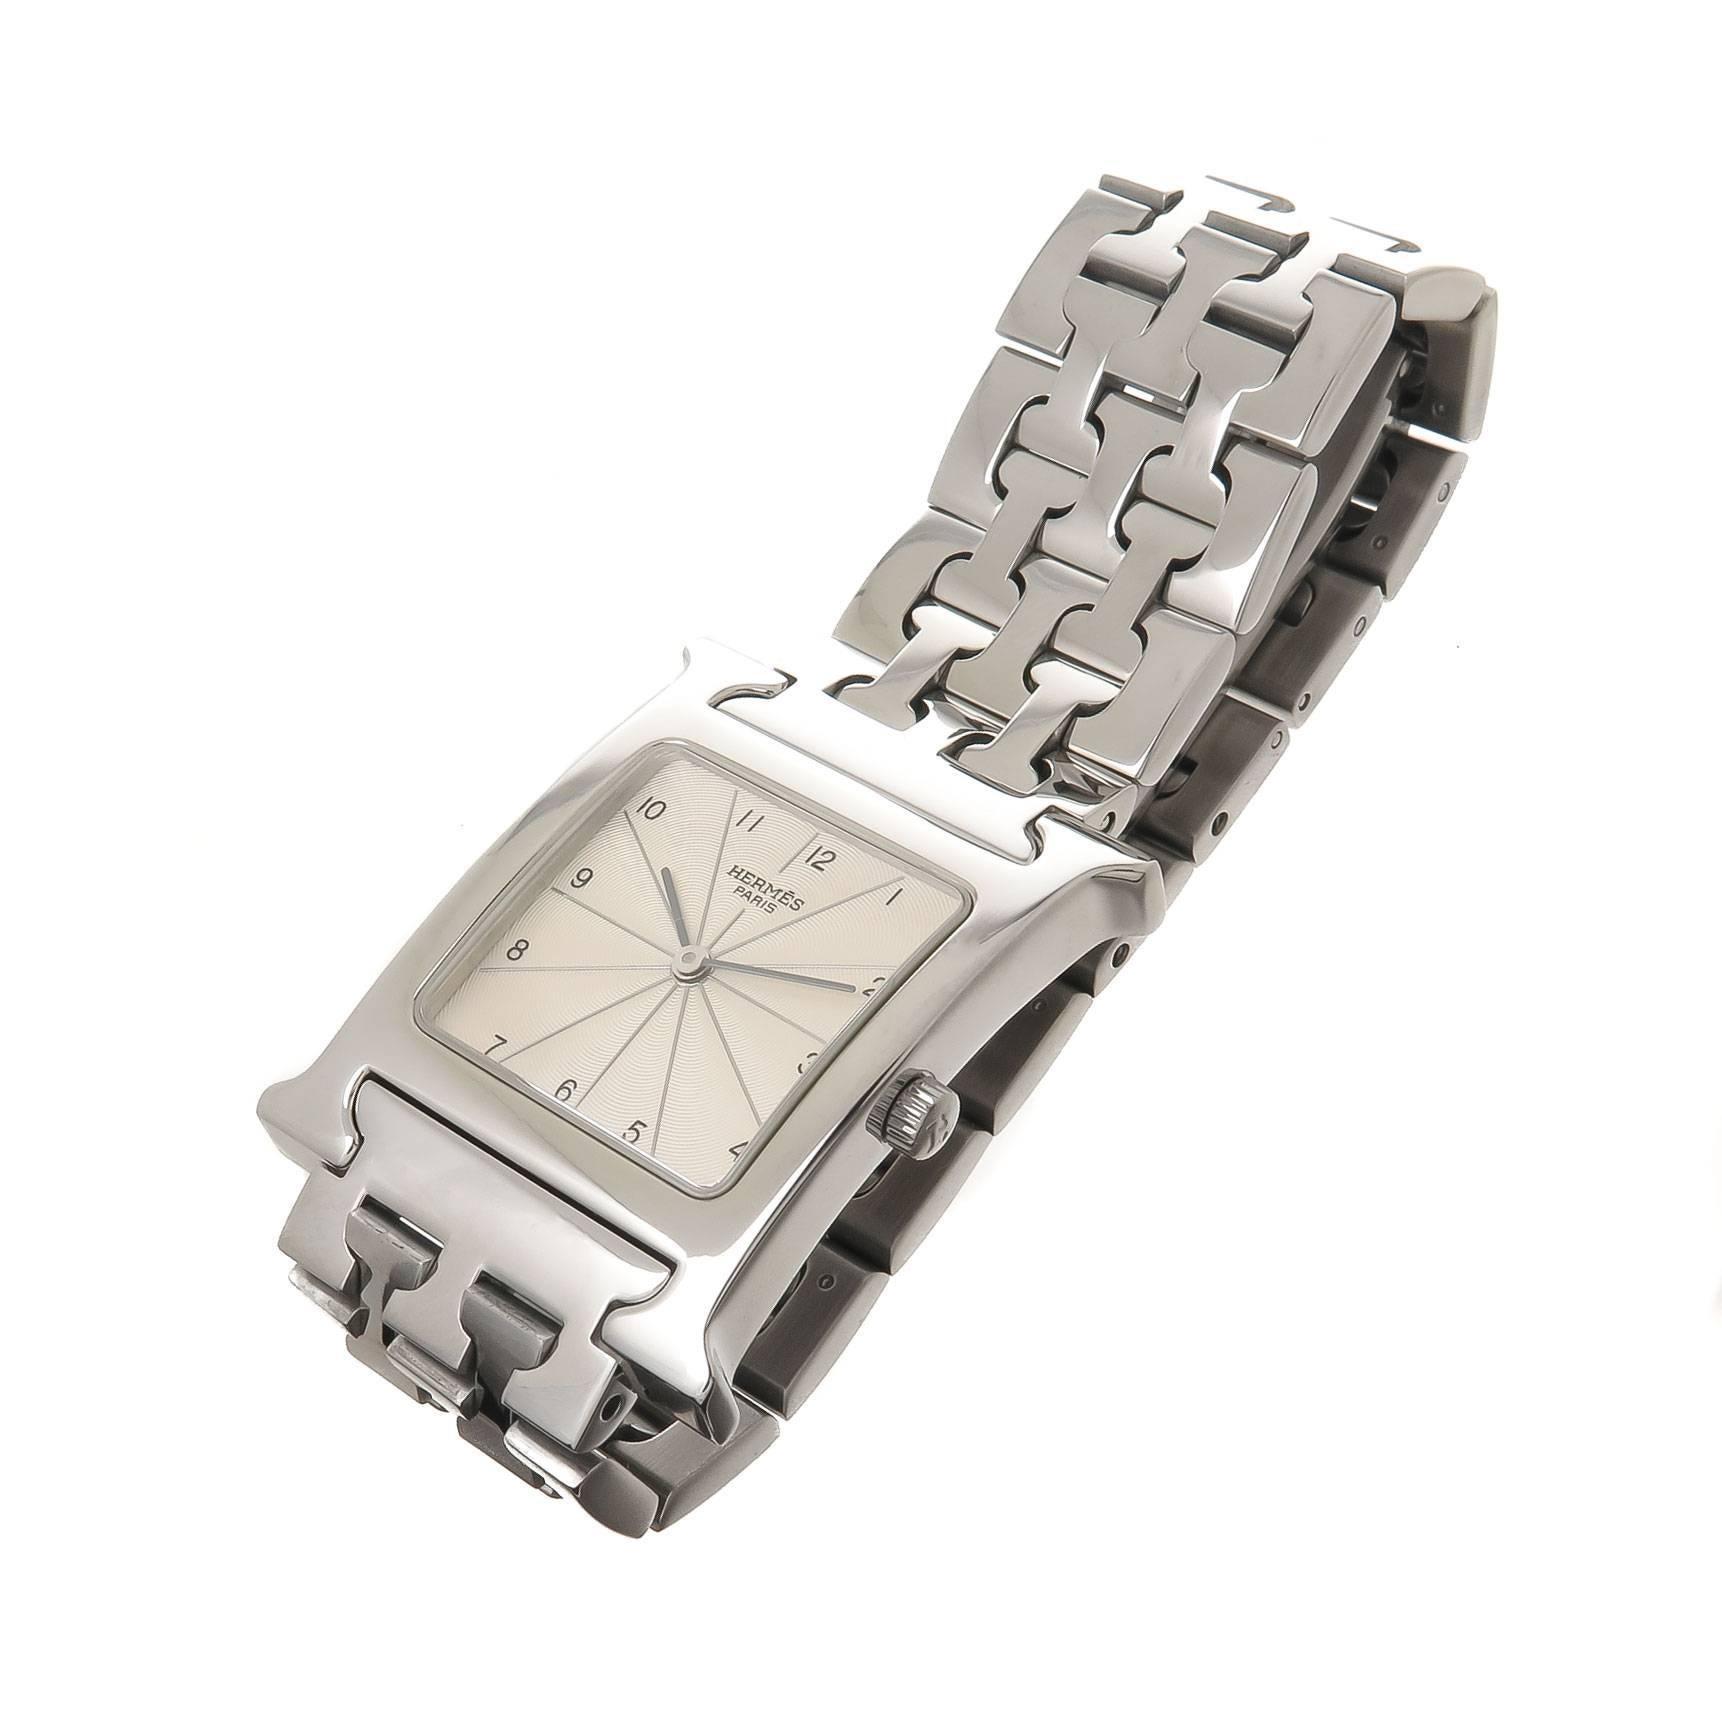 Circa 2012 Hermes H Collection Wrist Watch, 35 X 26 MM Stainless Steel case. Silver Engine Turned Dial with raised markers. Quartz Movement. 3/4 inch wise Steel H Bracelet with fold over Deployment clasp. Wrist size 6 Inches. Comes In original